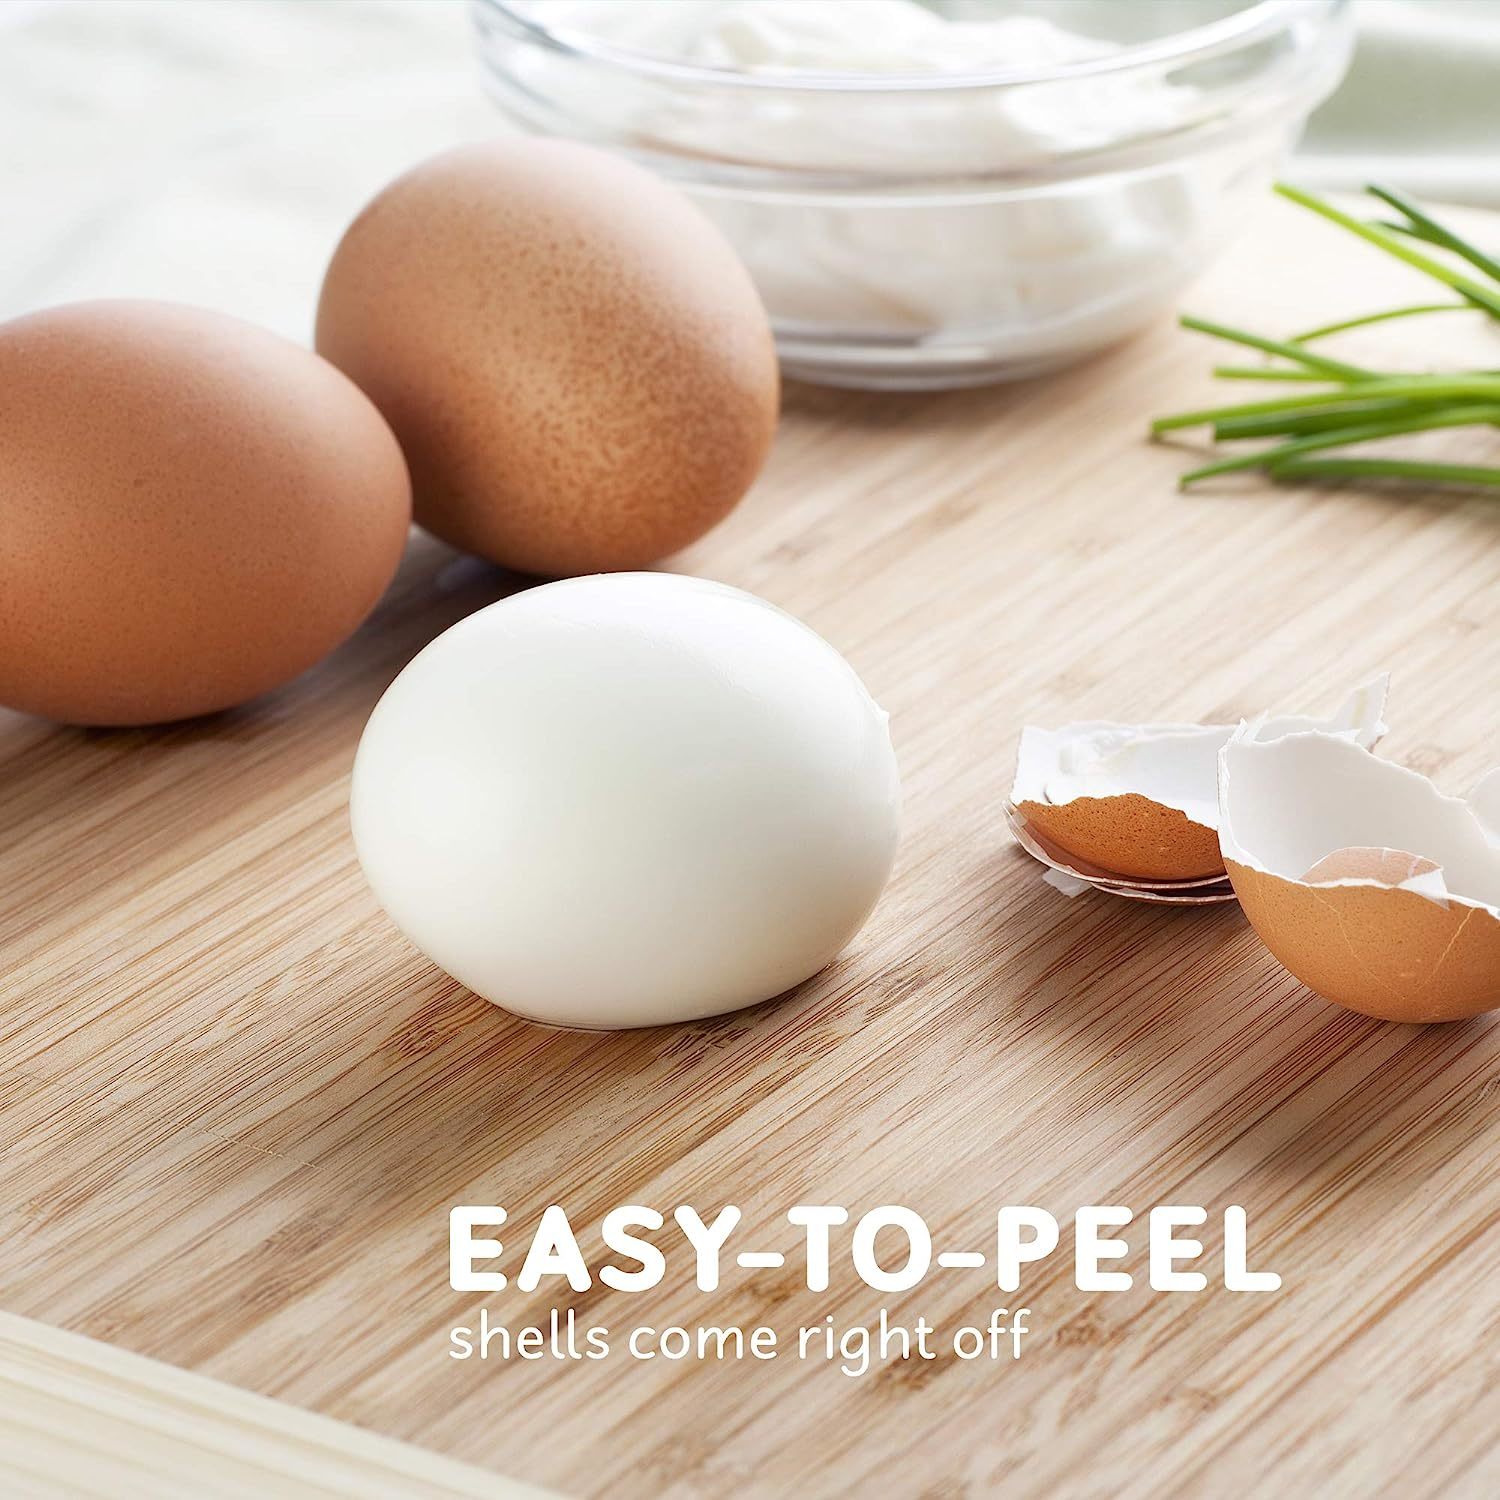 BELLA Rapid Electric Egg Cooker and Omelet Maker with Auto Shut Off, for  Easy to Peel, Poached Eggs, Soft, Medium and Hard-Boiled Eggs, 7 Egg  Capacity